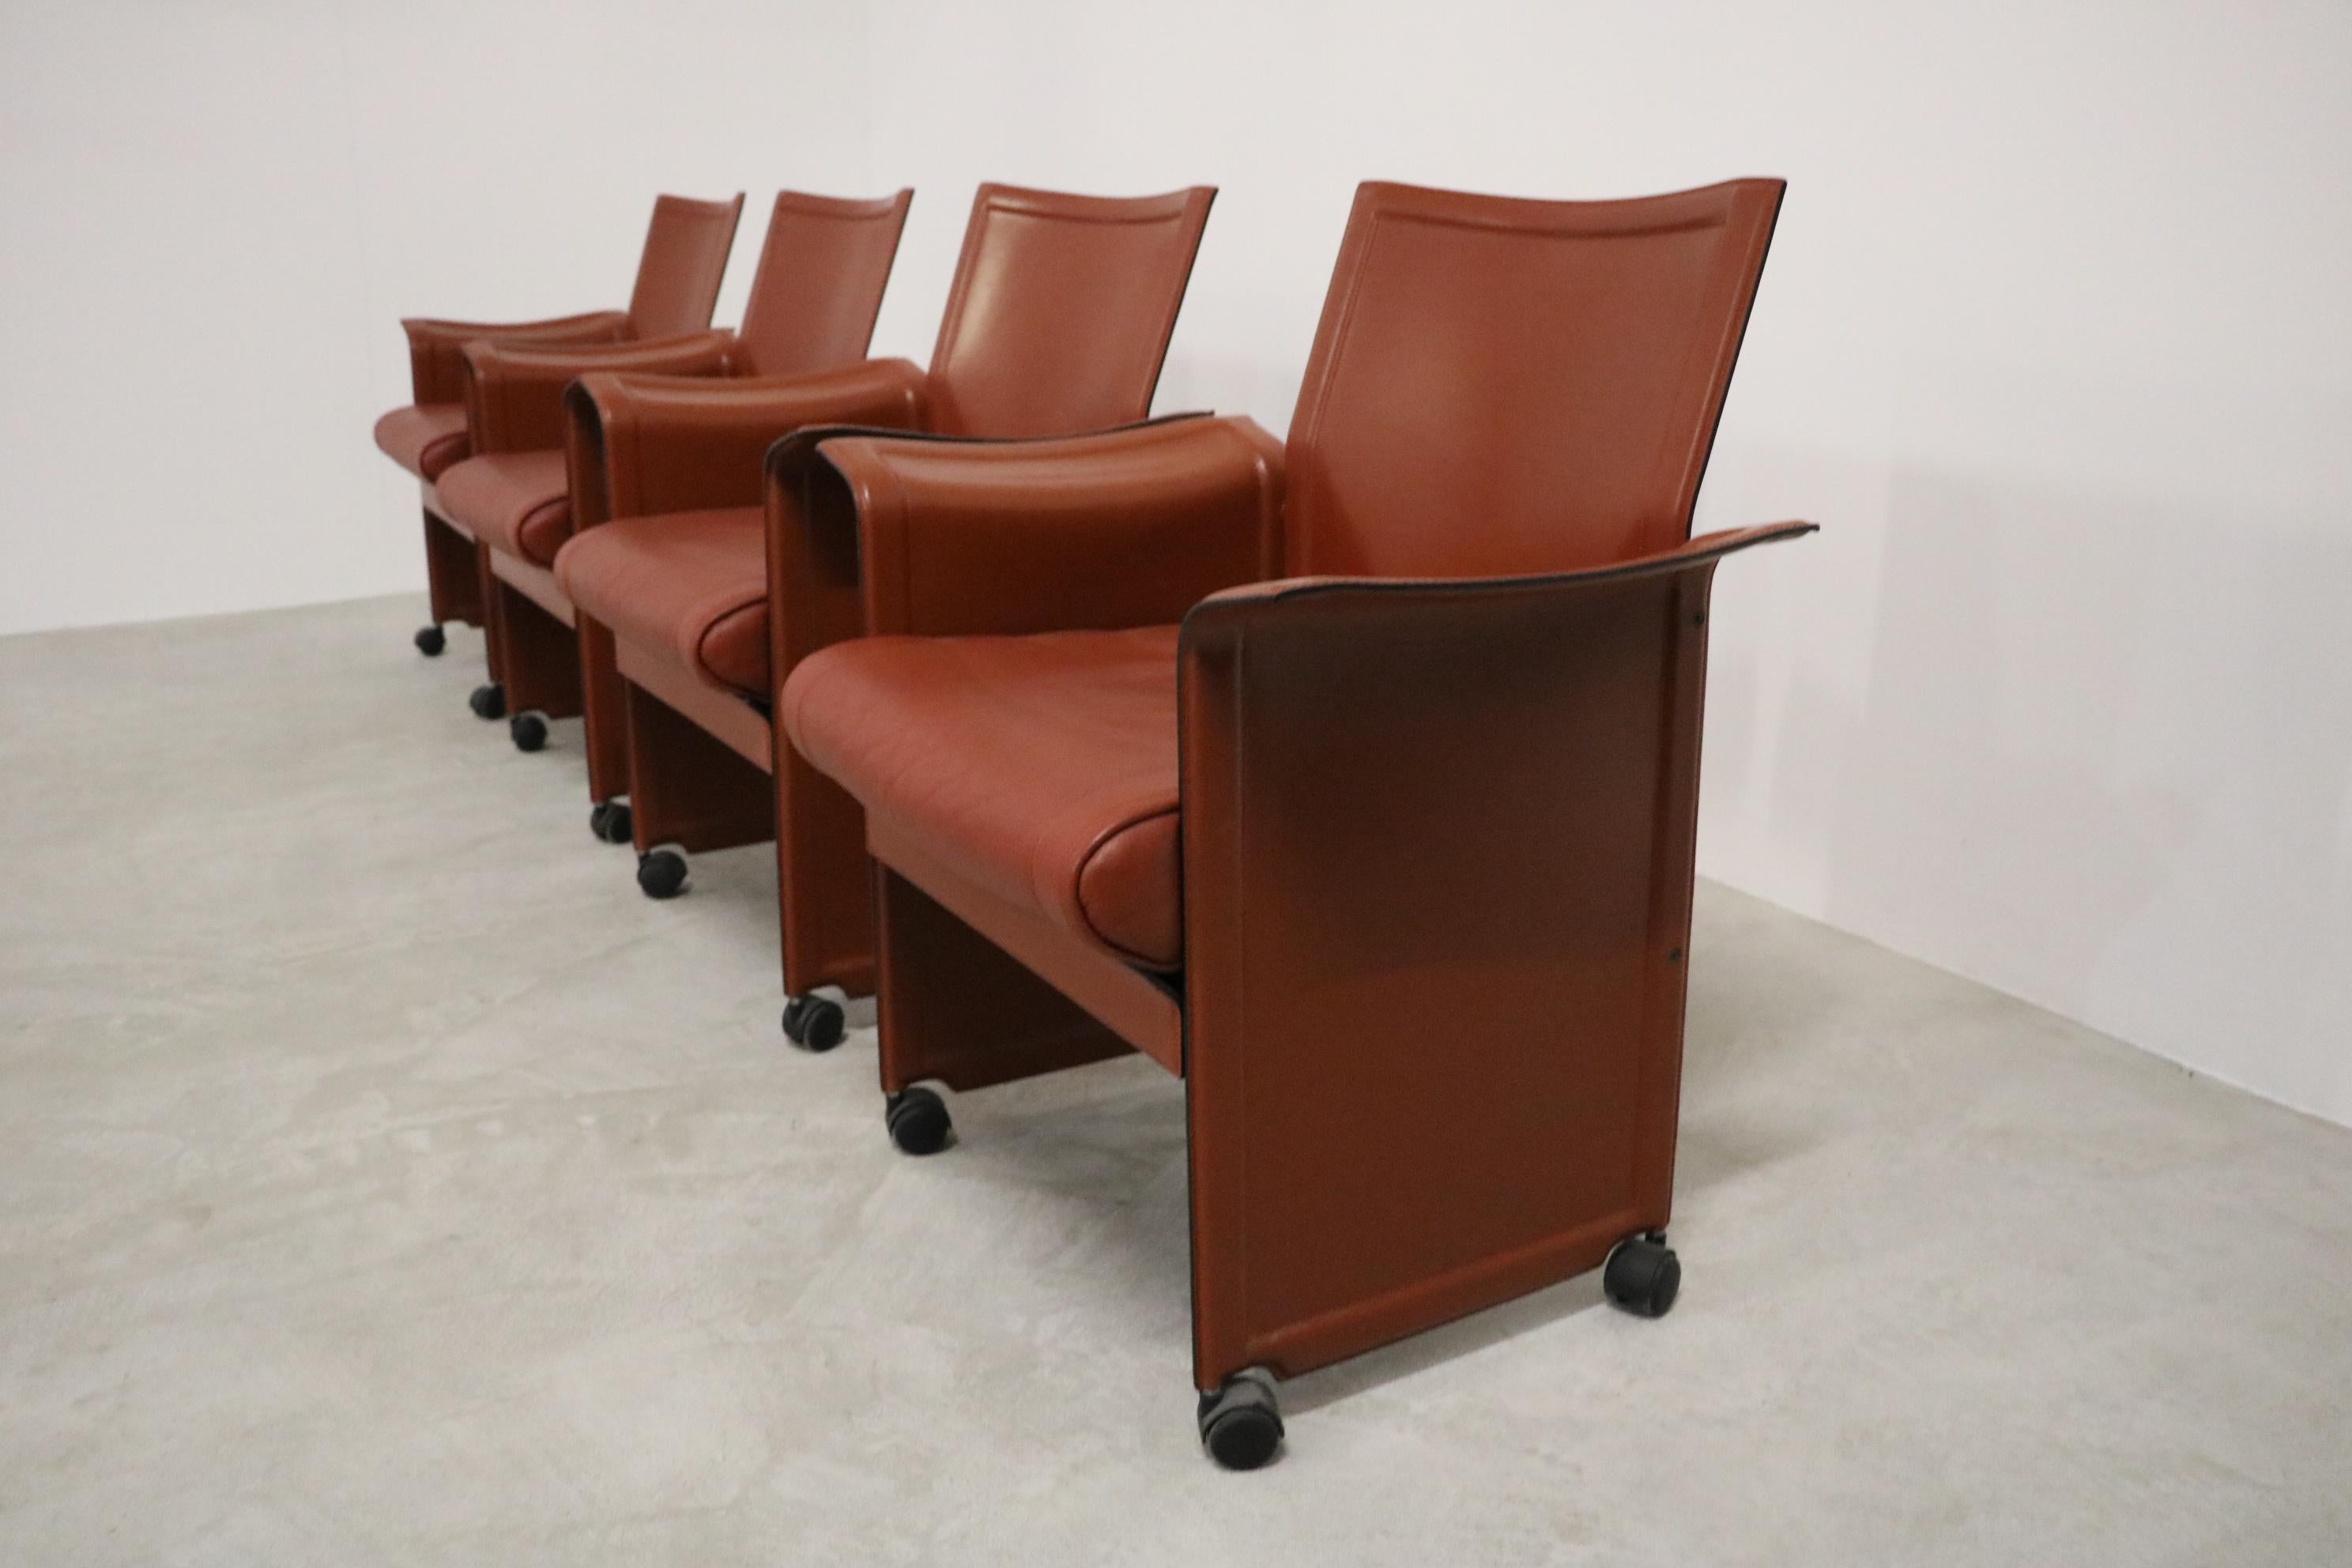 Leather Tito Agnoli armchairs 'Korium' with a 'Metron' table by Matteo Grassi For Sale